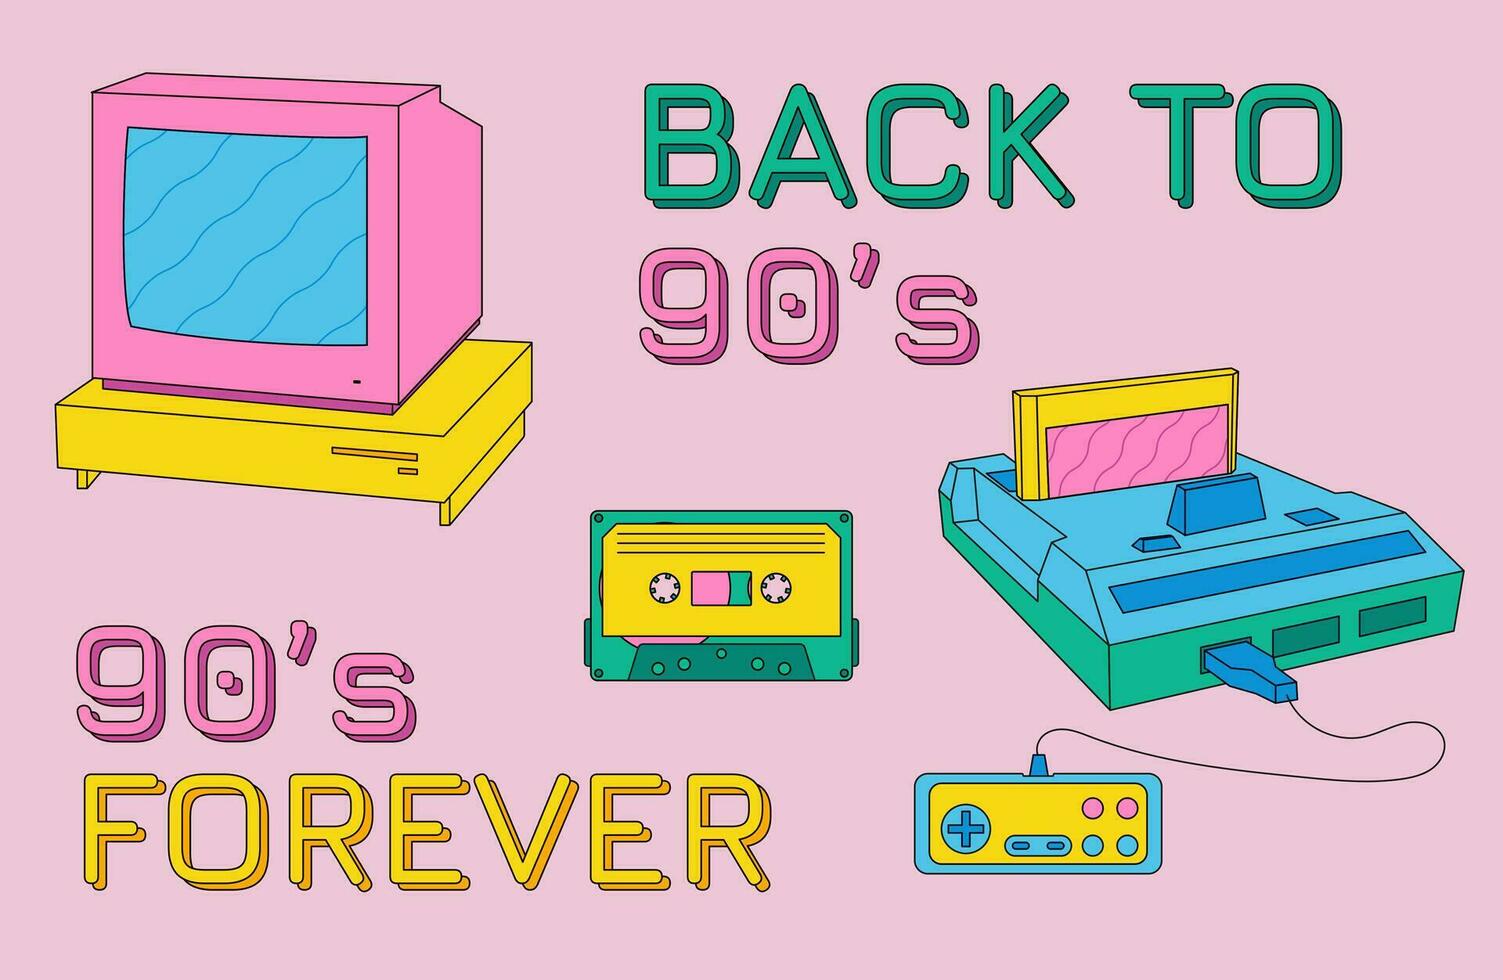 Set of retro games console, computer and cassette tape. 2000s style technology. Old style gadgets. Nostalgia set of 1990s, 2000s electronics devices. Retrowave style vector illustration